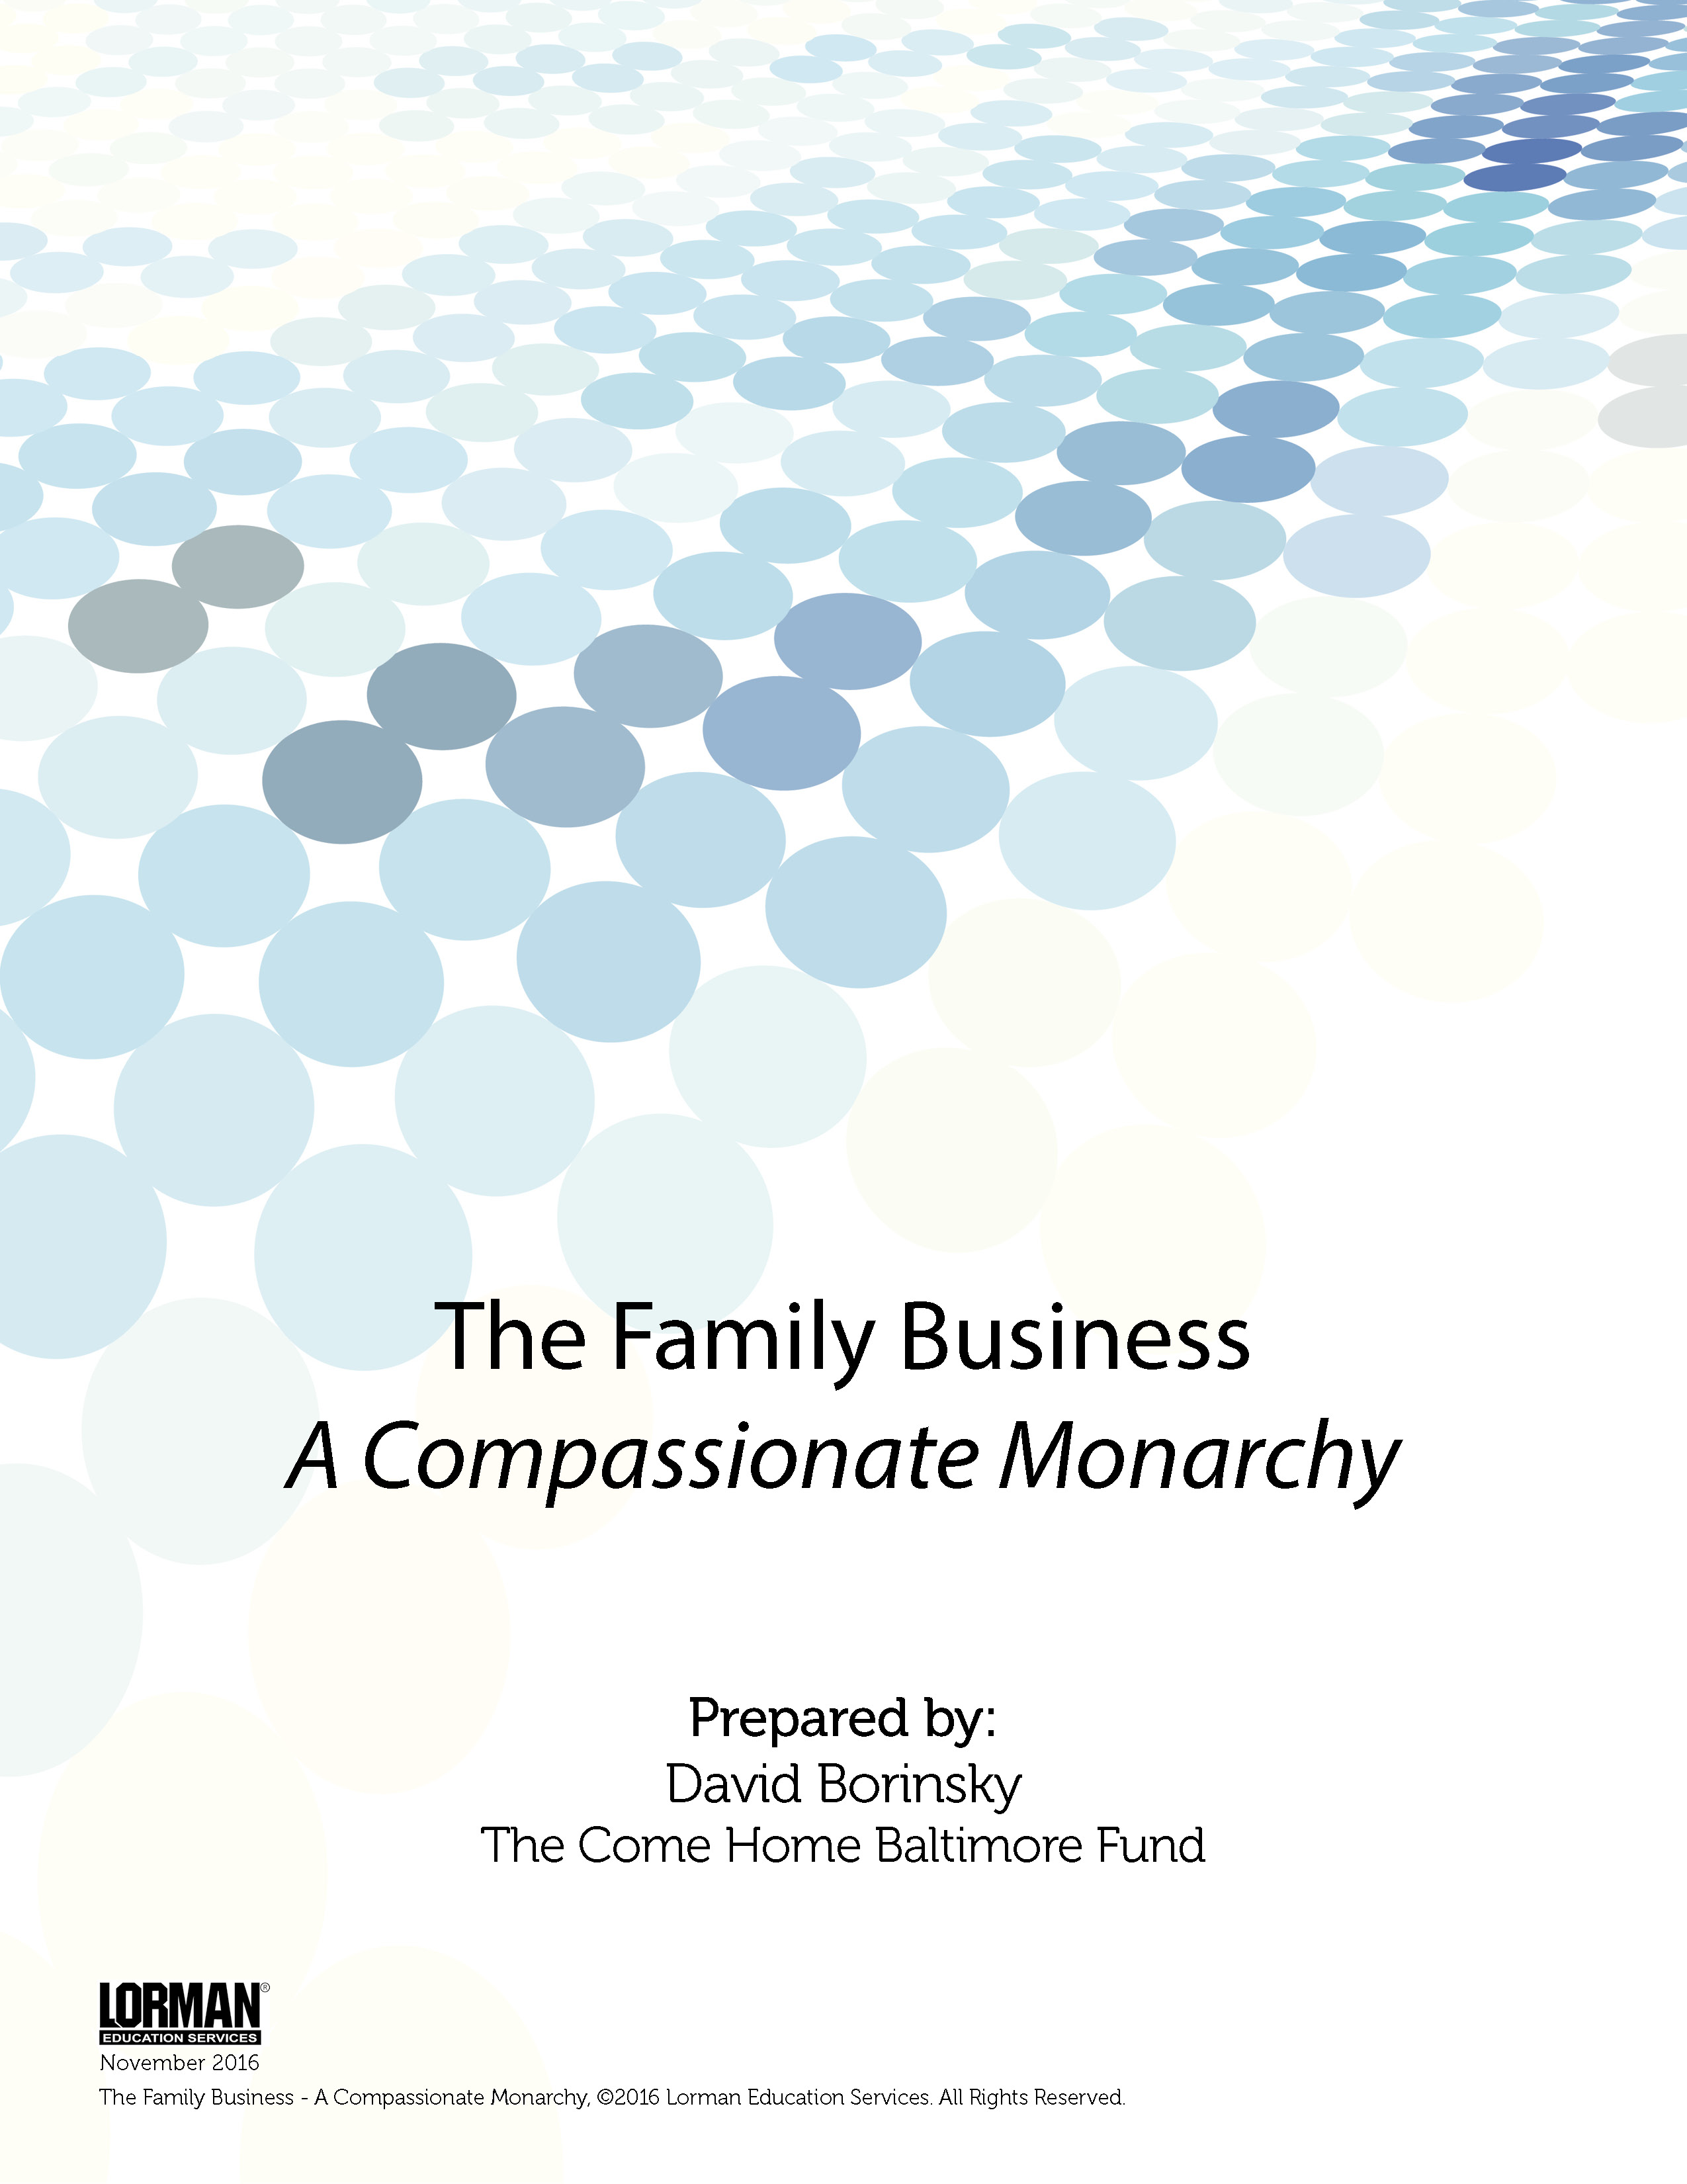 The Family Business - A Compassionate Monarchy